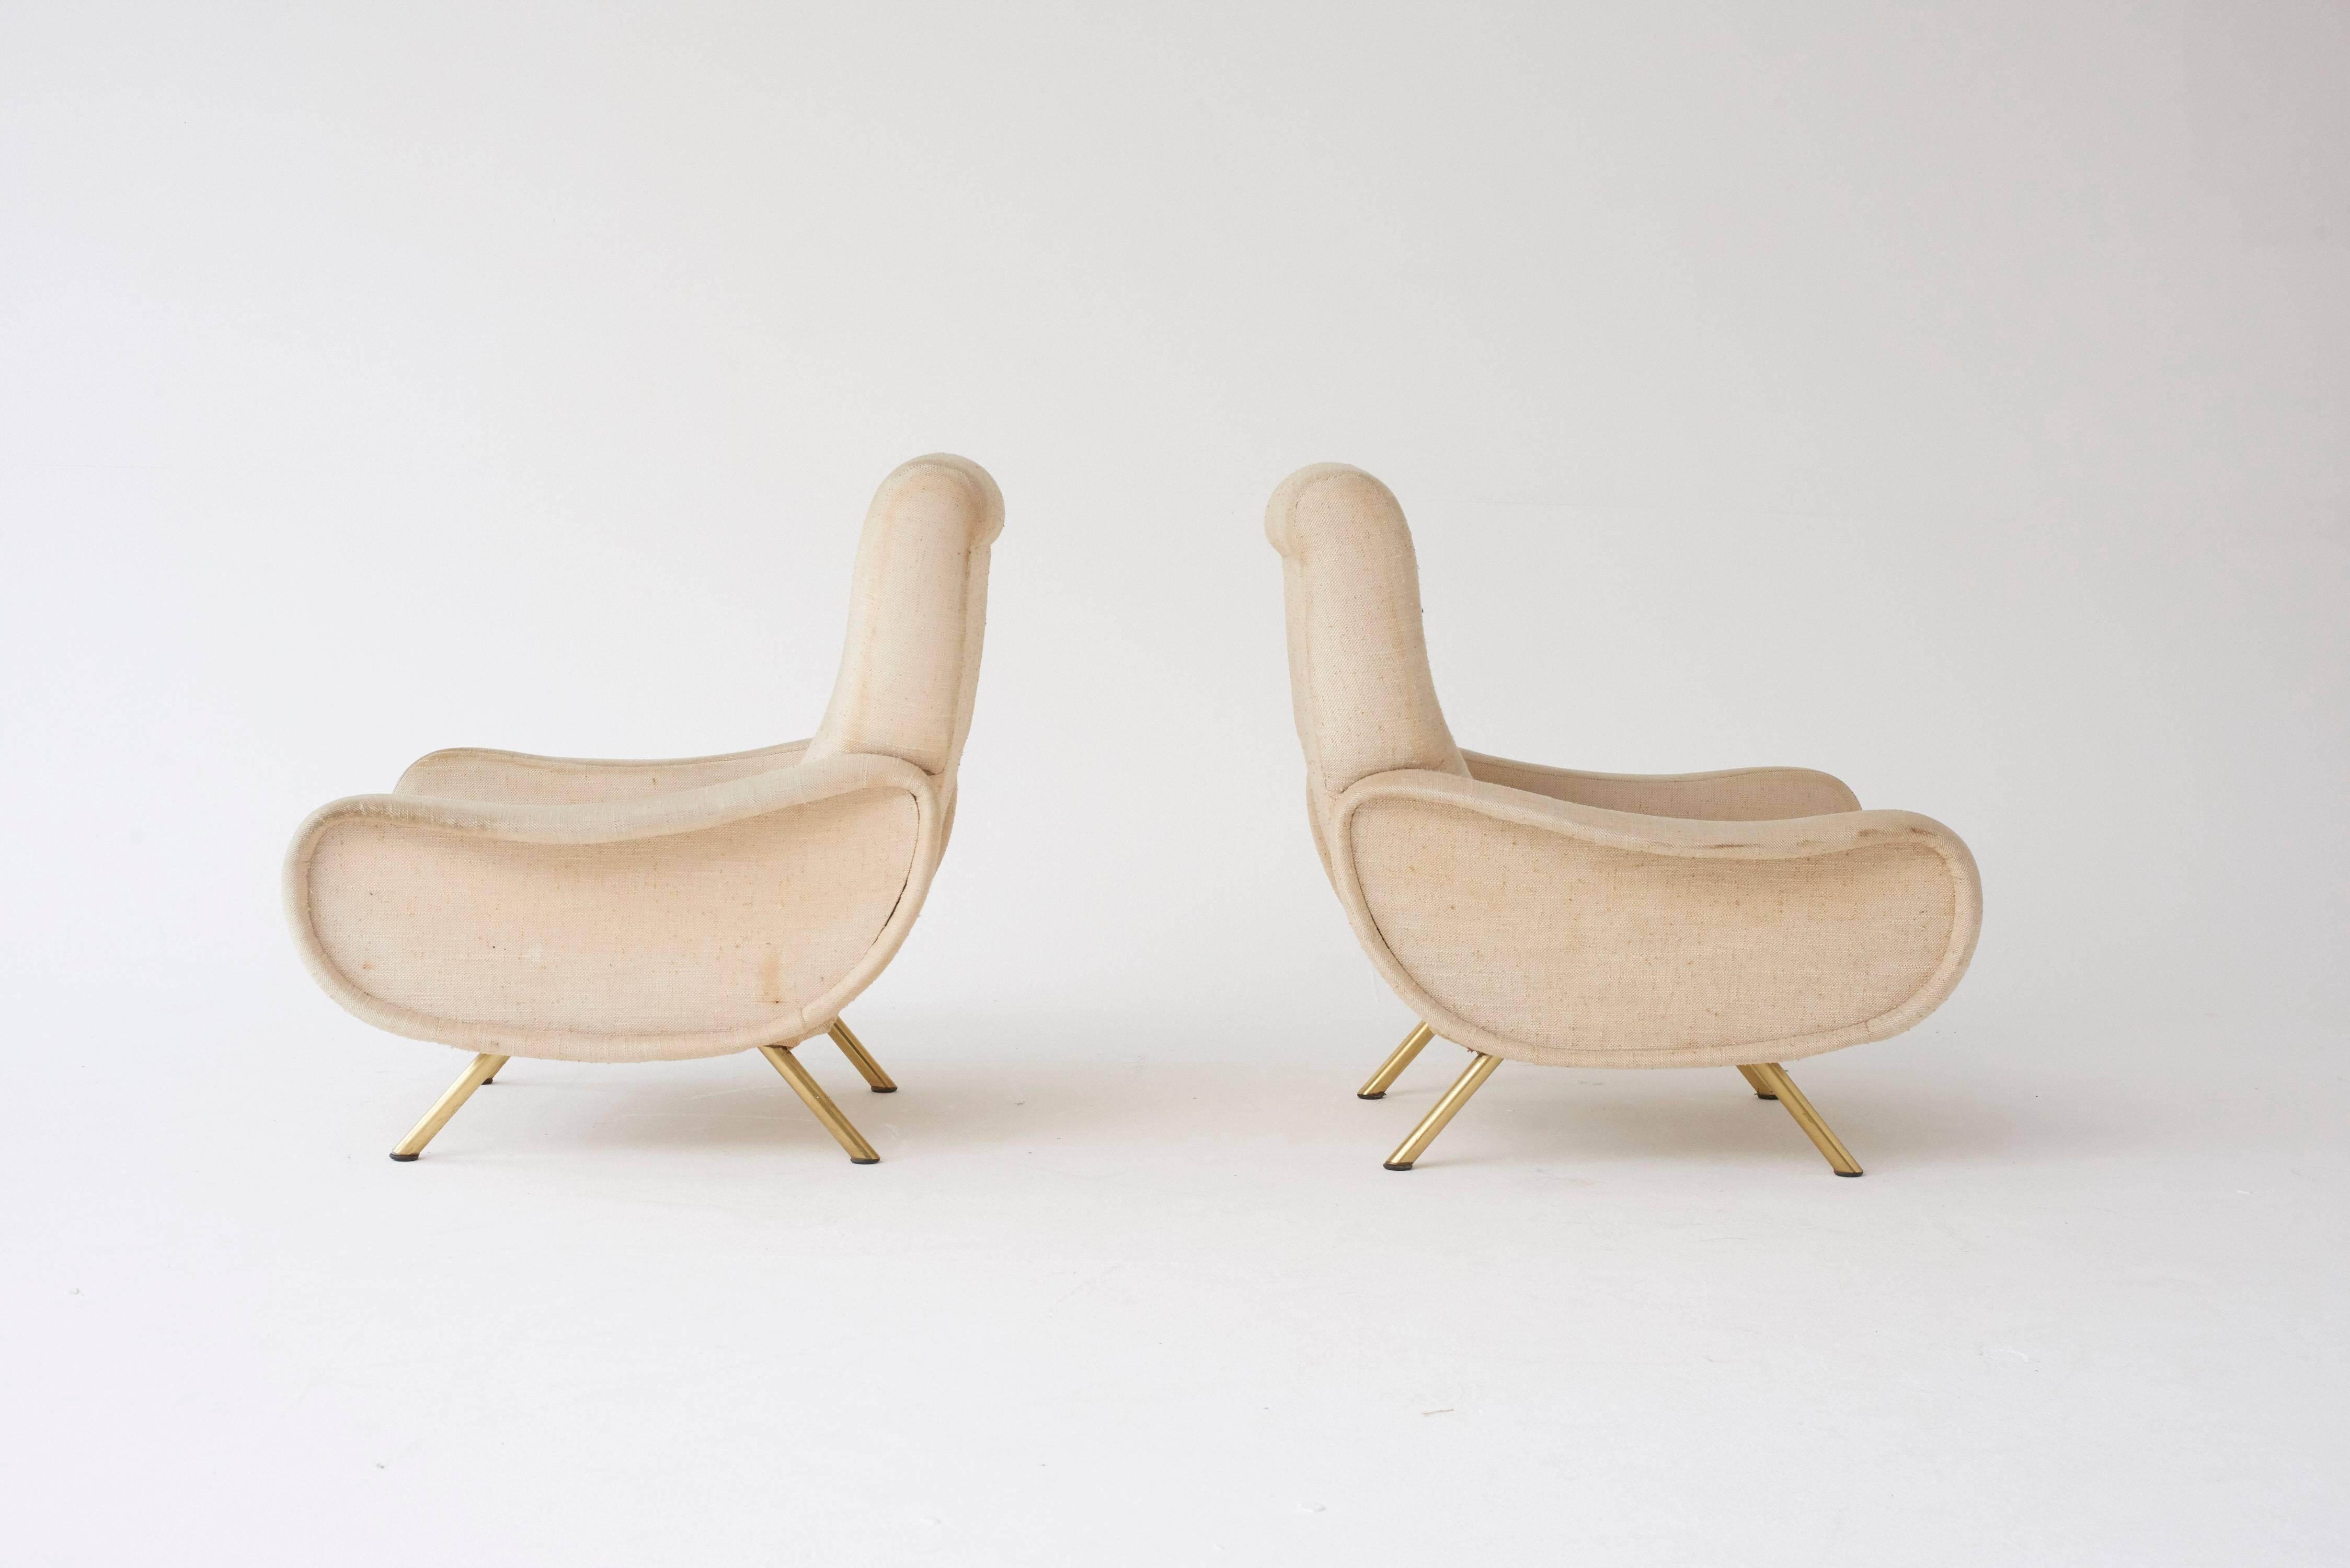 A pair of original Marco Zanuso Lady chairs, Arflex, France/Italy, 1960s. The fabric is a bit dirty so the price here includes recovering in customer supplied material.  Ships worldwide - please contact us for options.